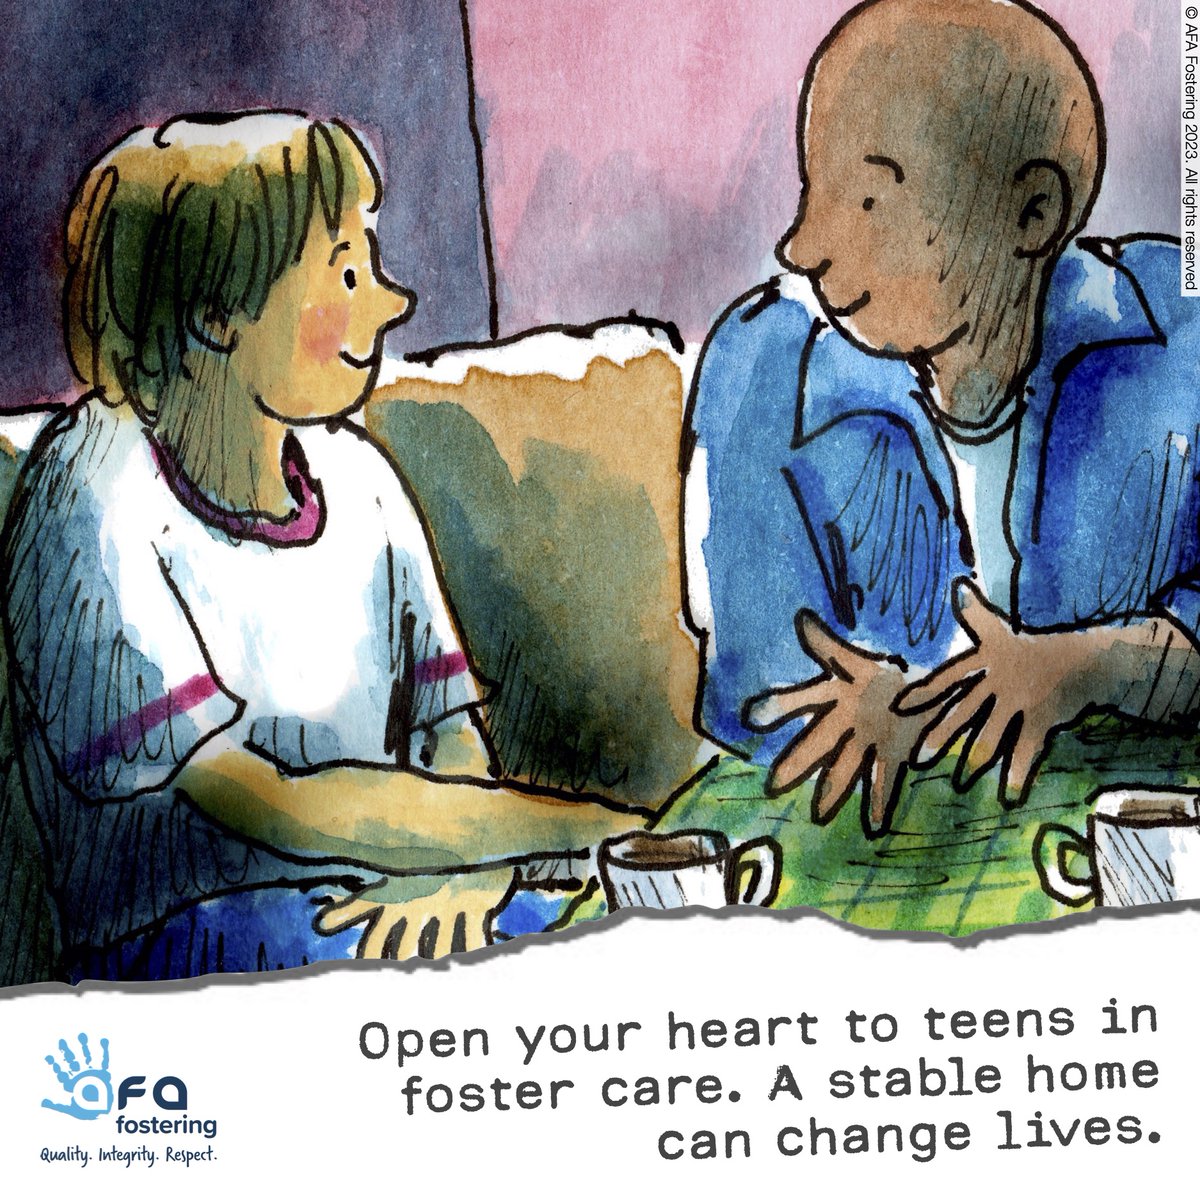 Teenagers in foster care need love and support as much as any youth. Older children in care often face adversity, requiring time and patience. Fostering older kids provides increased allowances and flexibility. Call 0333 358 3217 to make a positive impact. #FosteringTeens